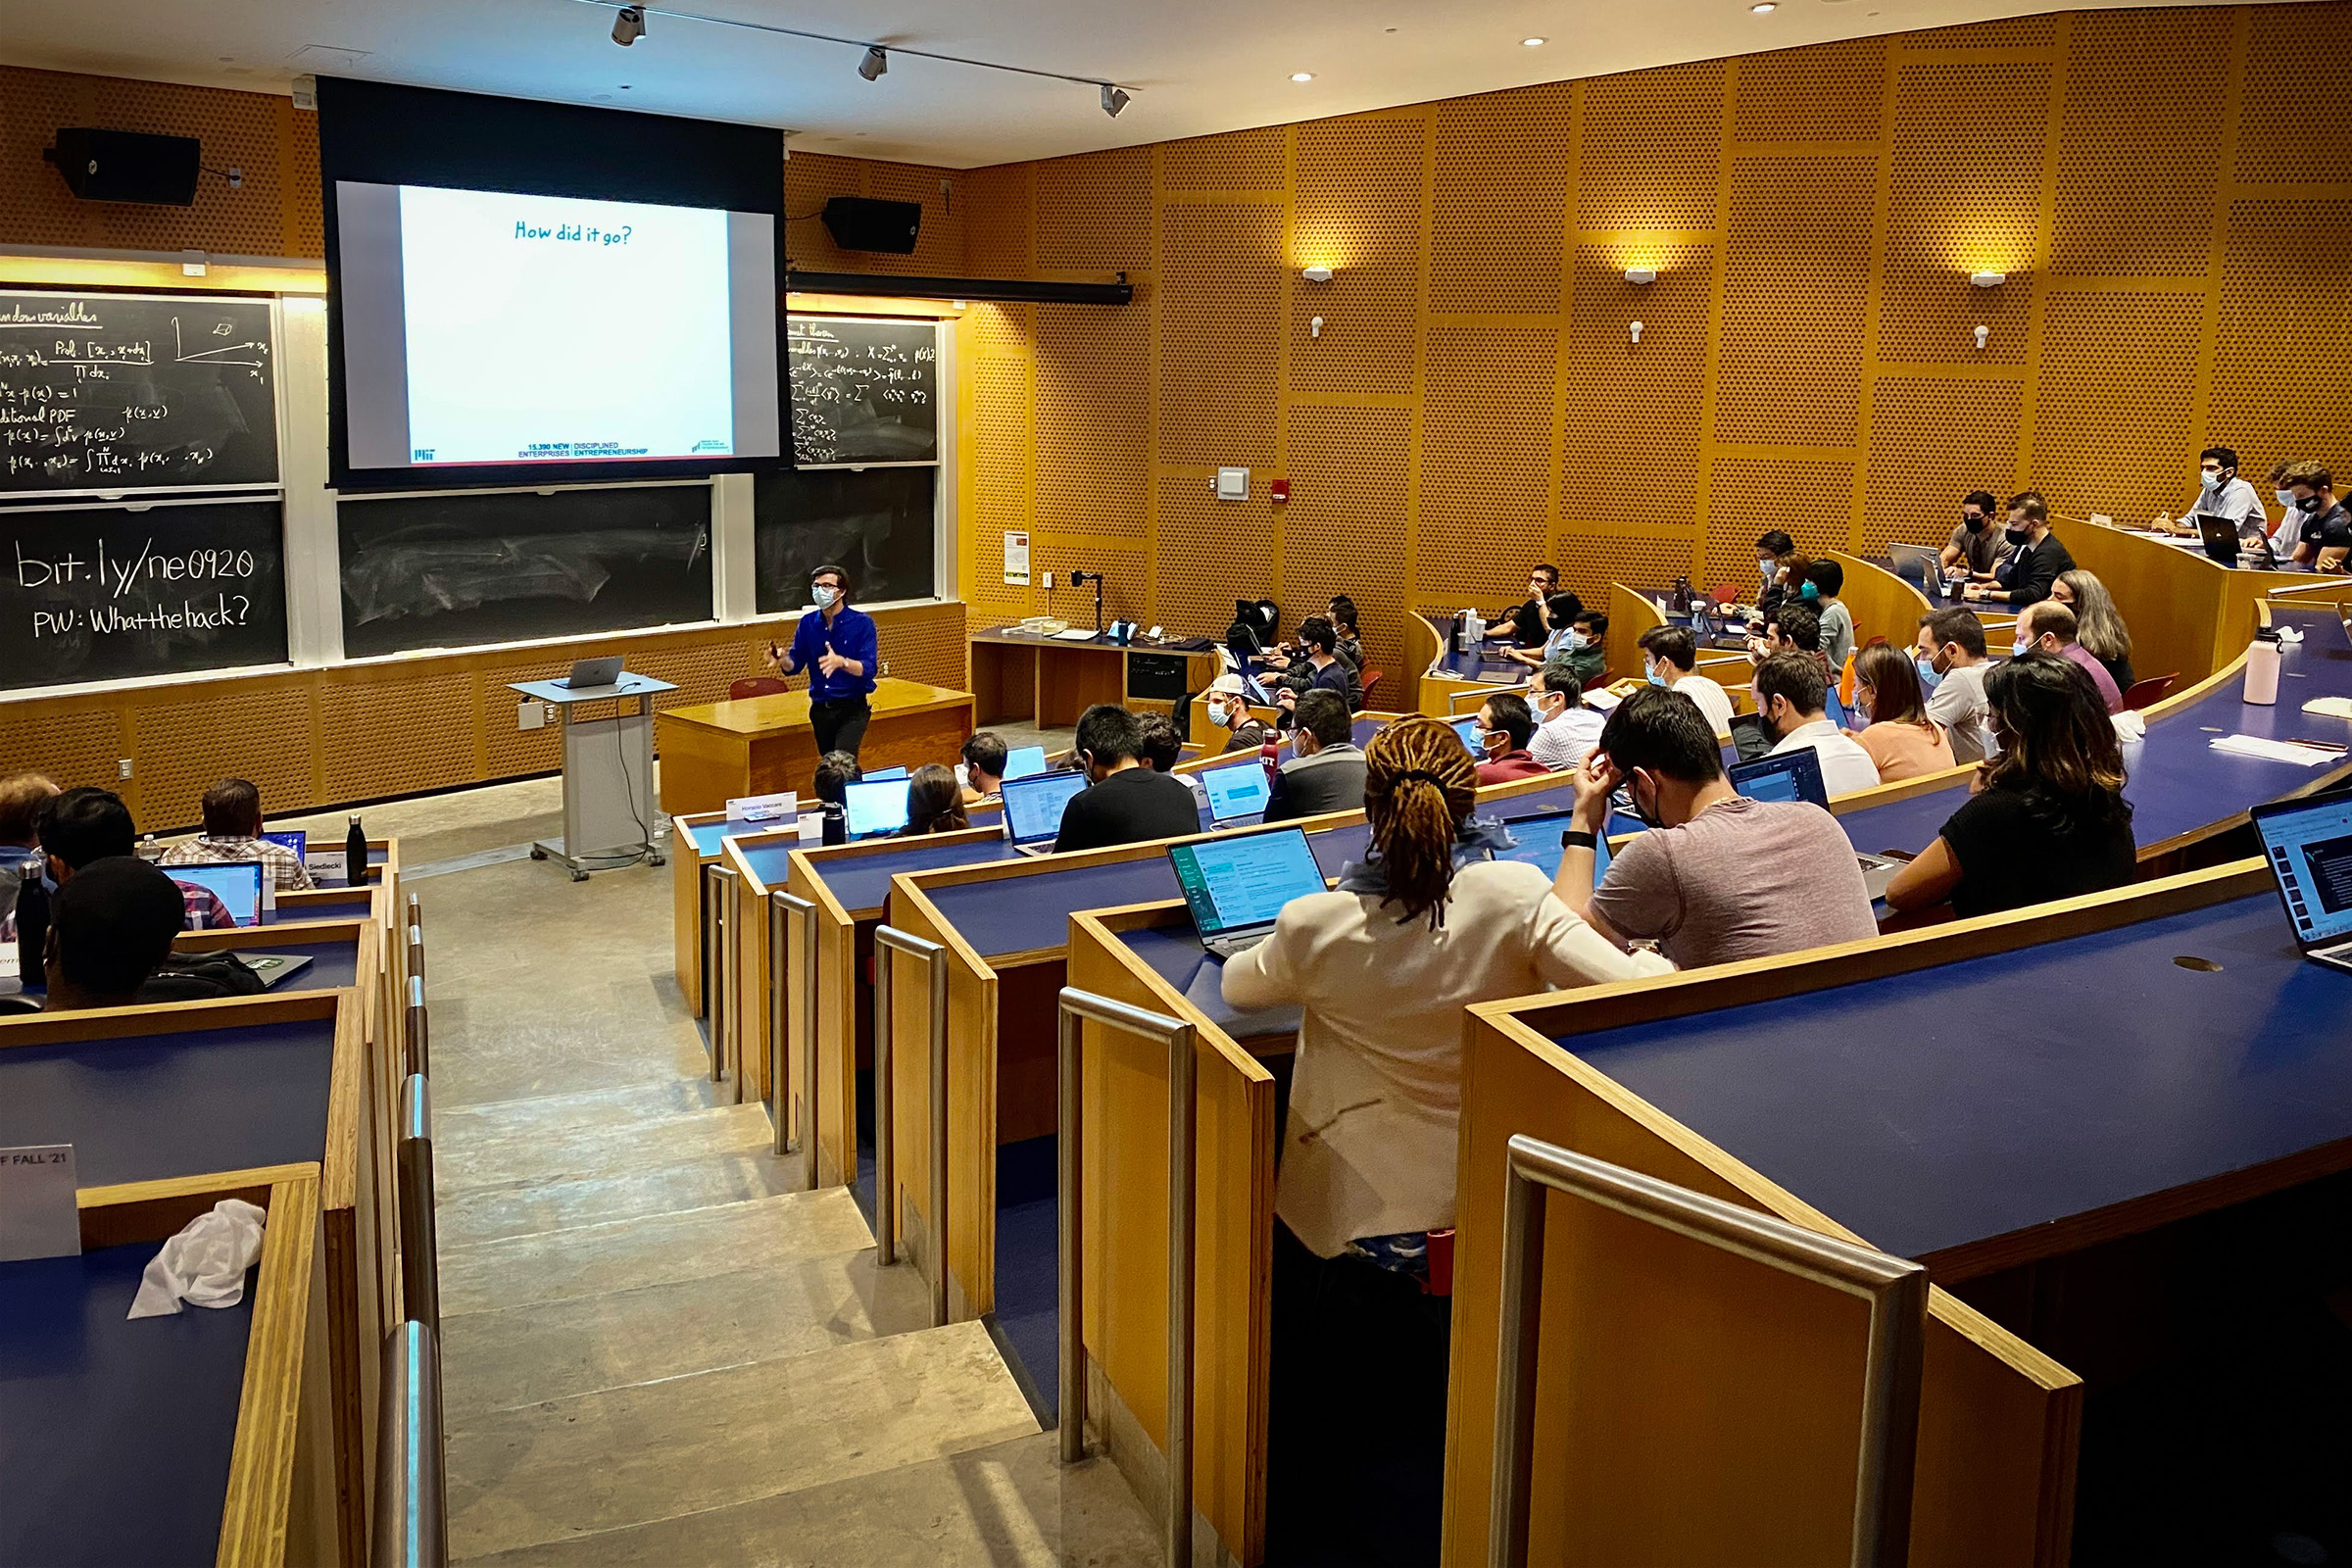 MIT’s New Enterprises course challenges students to work through every step of the entrepreneurship process. It has been taught every year since 1961. In this photo, Sloan lecturer Paul Cheek teaches the New Enterprises course at MIT.